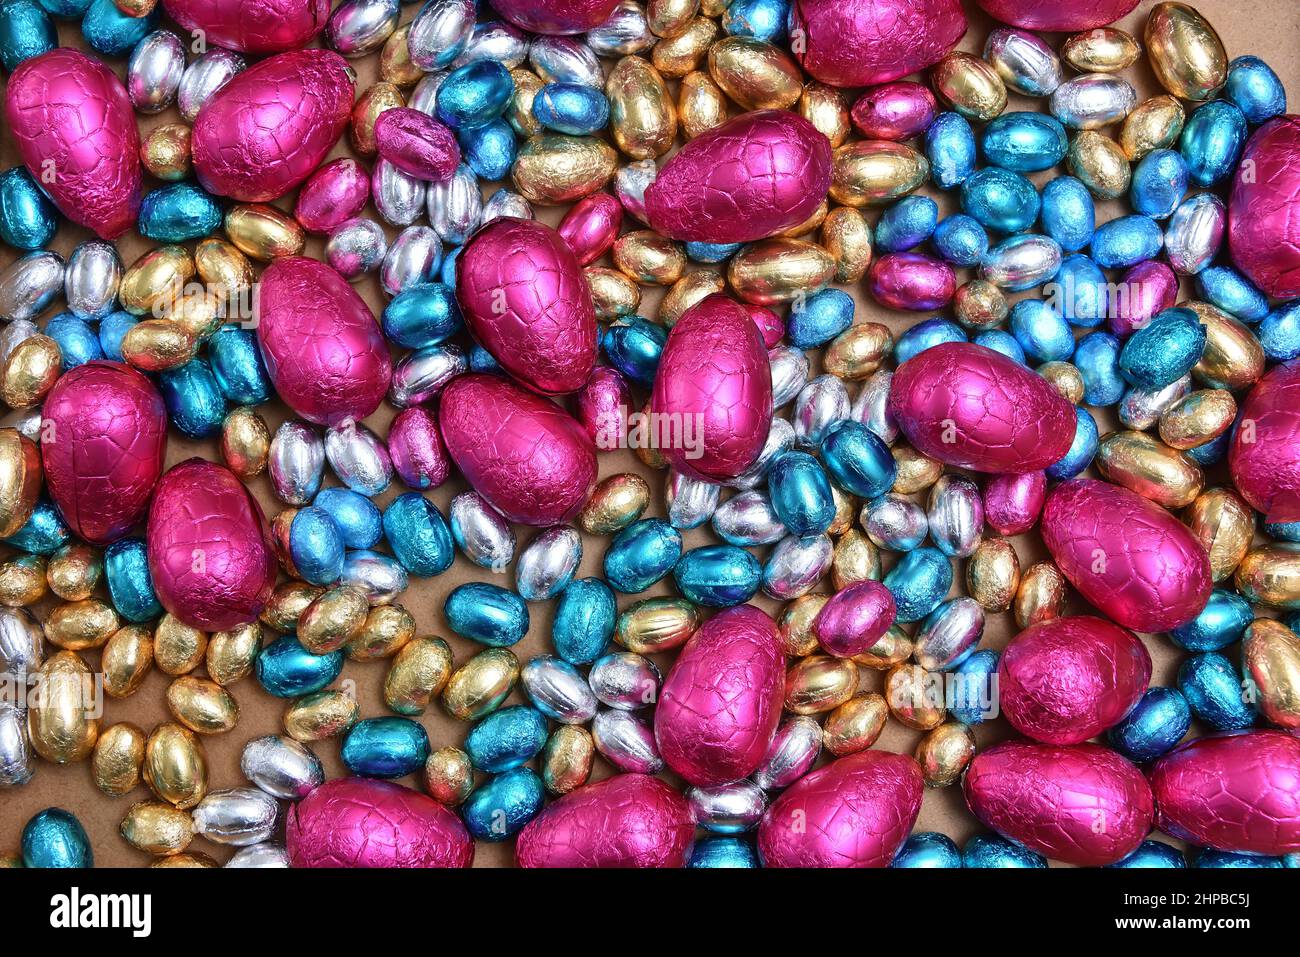 Small pink, blue, silver and gold foil wrapped chocolate easter eggs, with large pink eggs against a pale wood background. Stock Photo